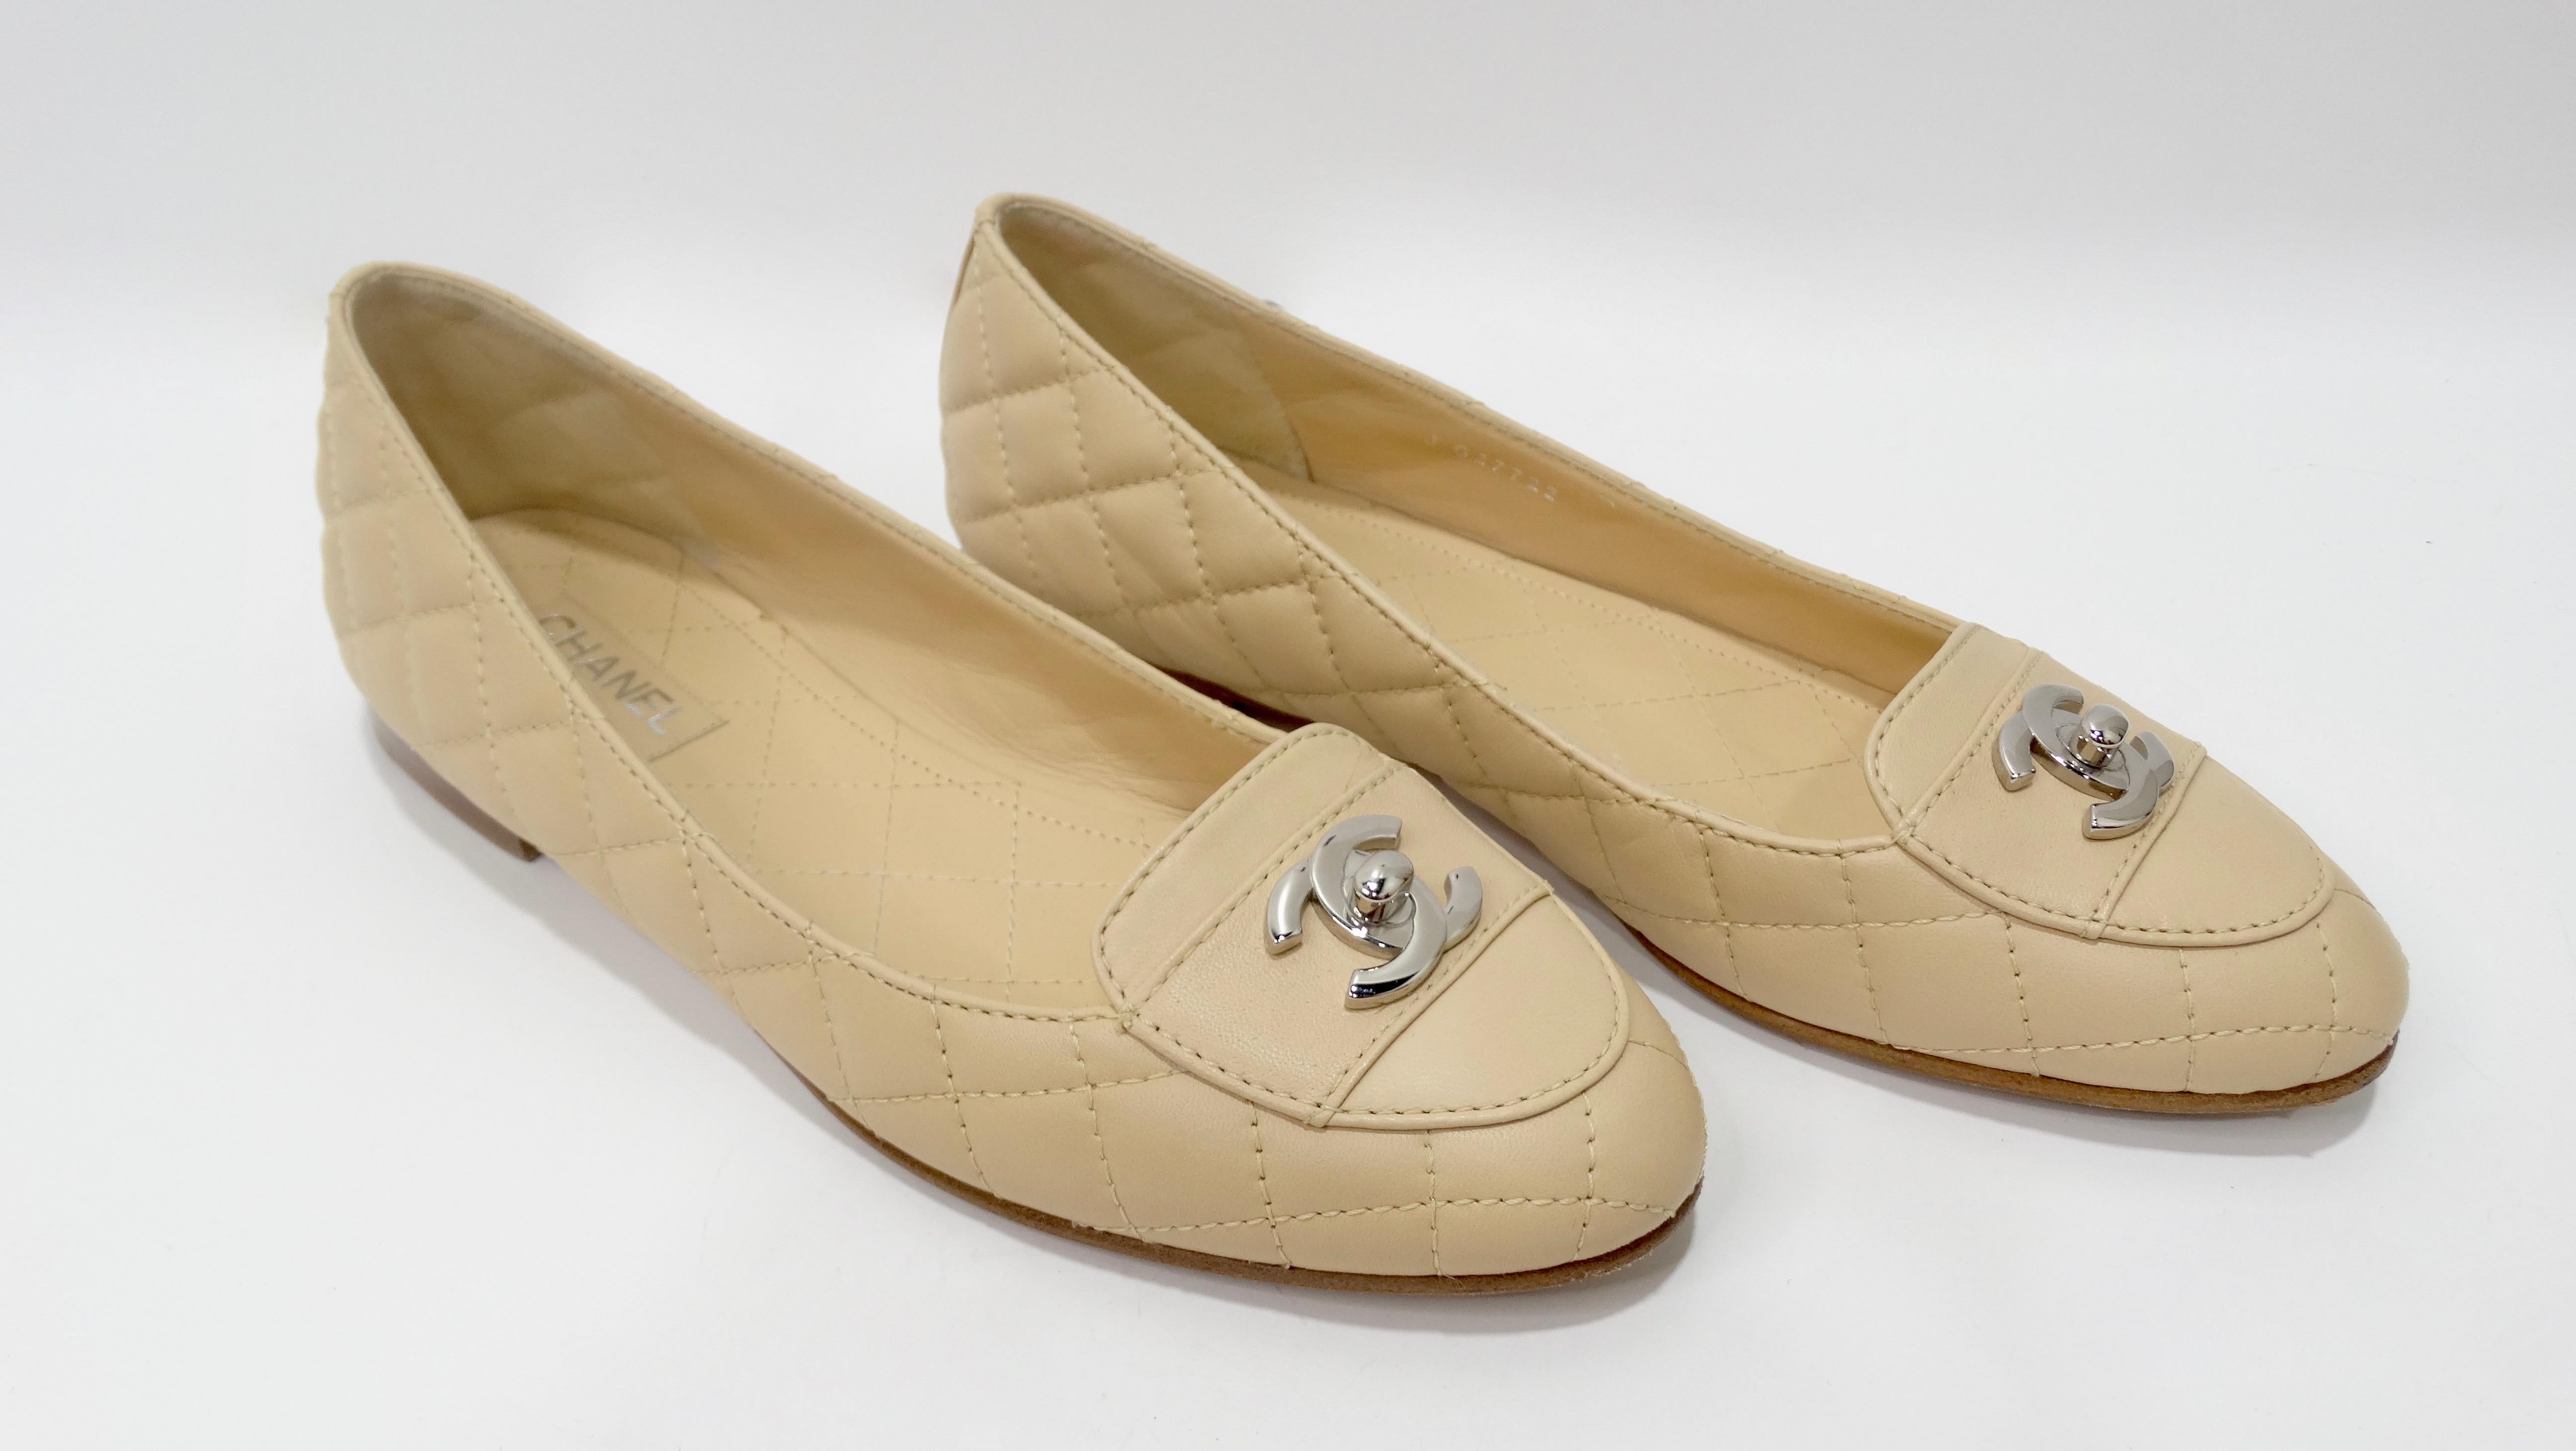 For every Chanel lover! Circa 2000s, these adorable flats are crafted from soft beige leather and feature Chanel's signature quilted stitching, a wood heel and a silver toned CC turn lock at the upper. Insoles feature quilted stitching. Classic and